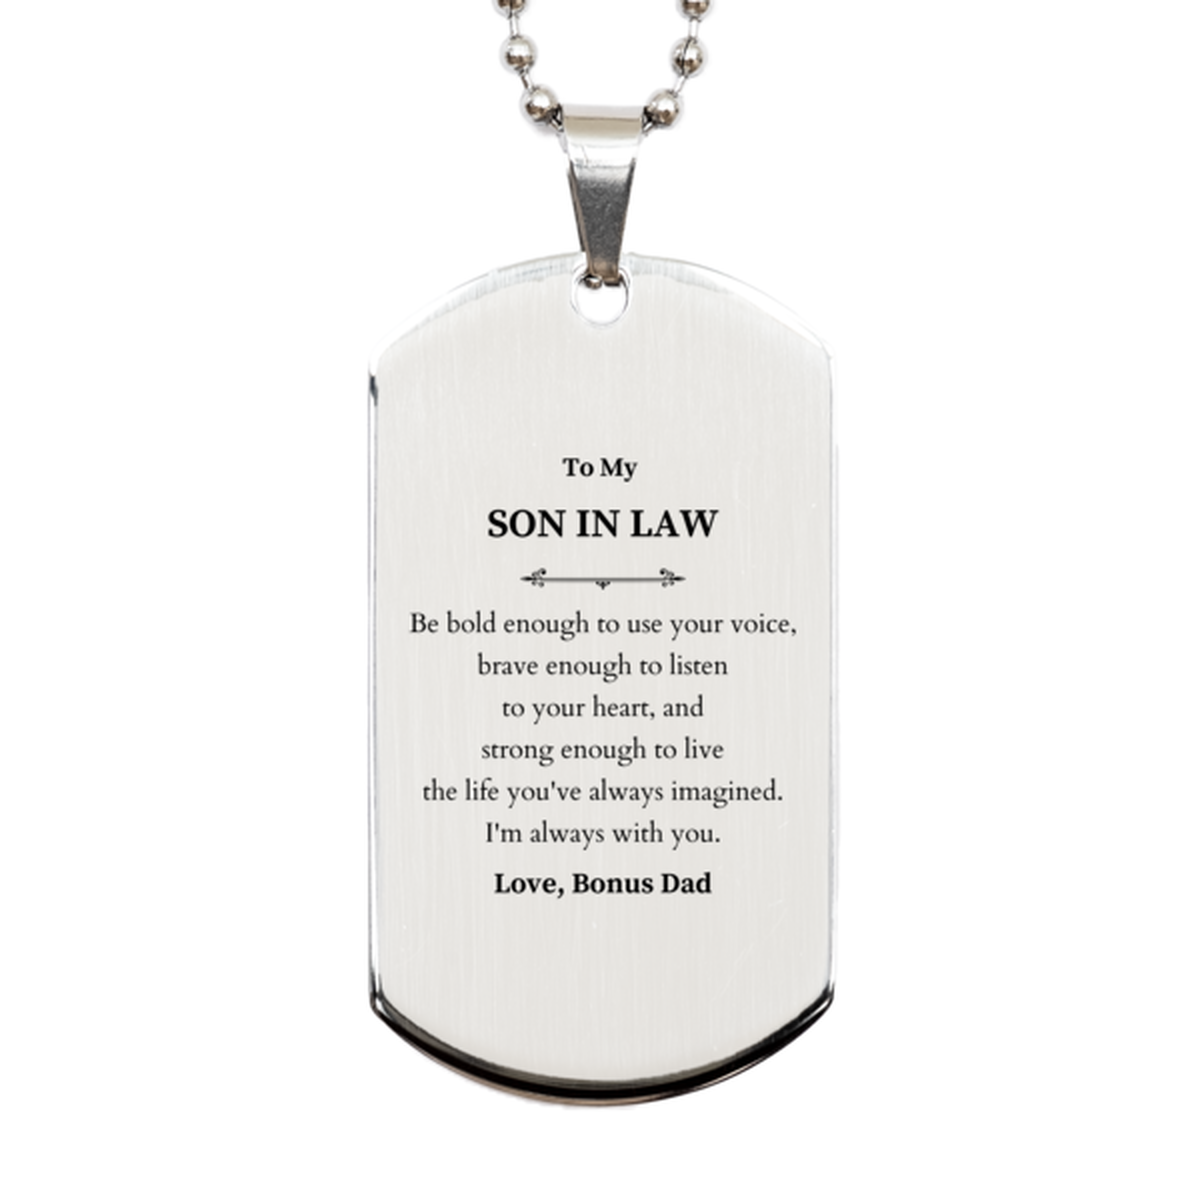 Keepsake Son In Law Silver Dog Tag Gift Idea Graduation Christmas Birthday Son In Law from Bonus Dad, Son In Law Be bold enough to use your voice, brave enough to listen to your heart. Love, Bonus Dad